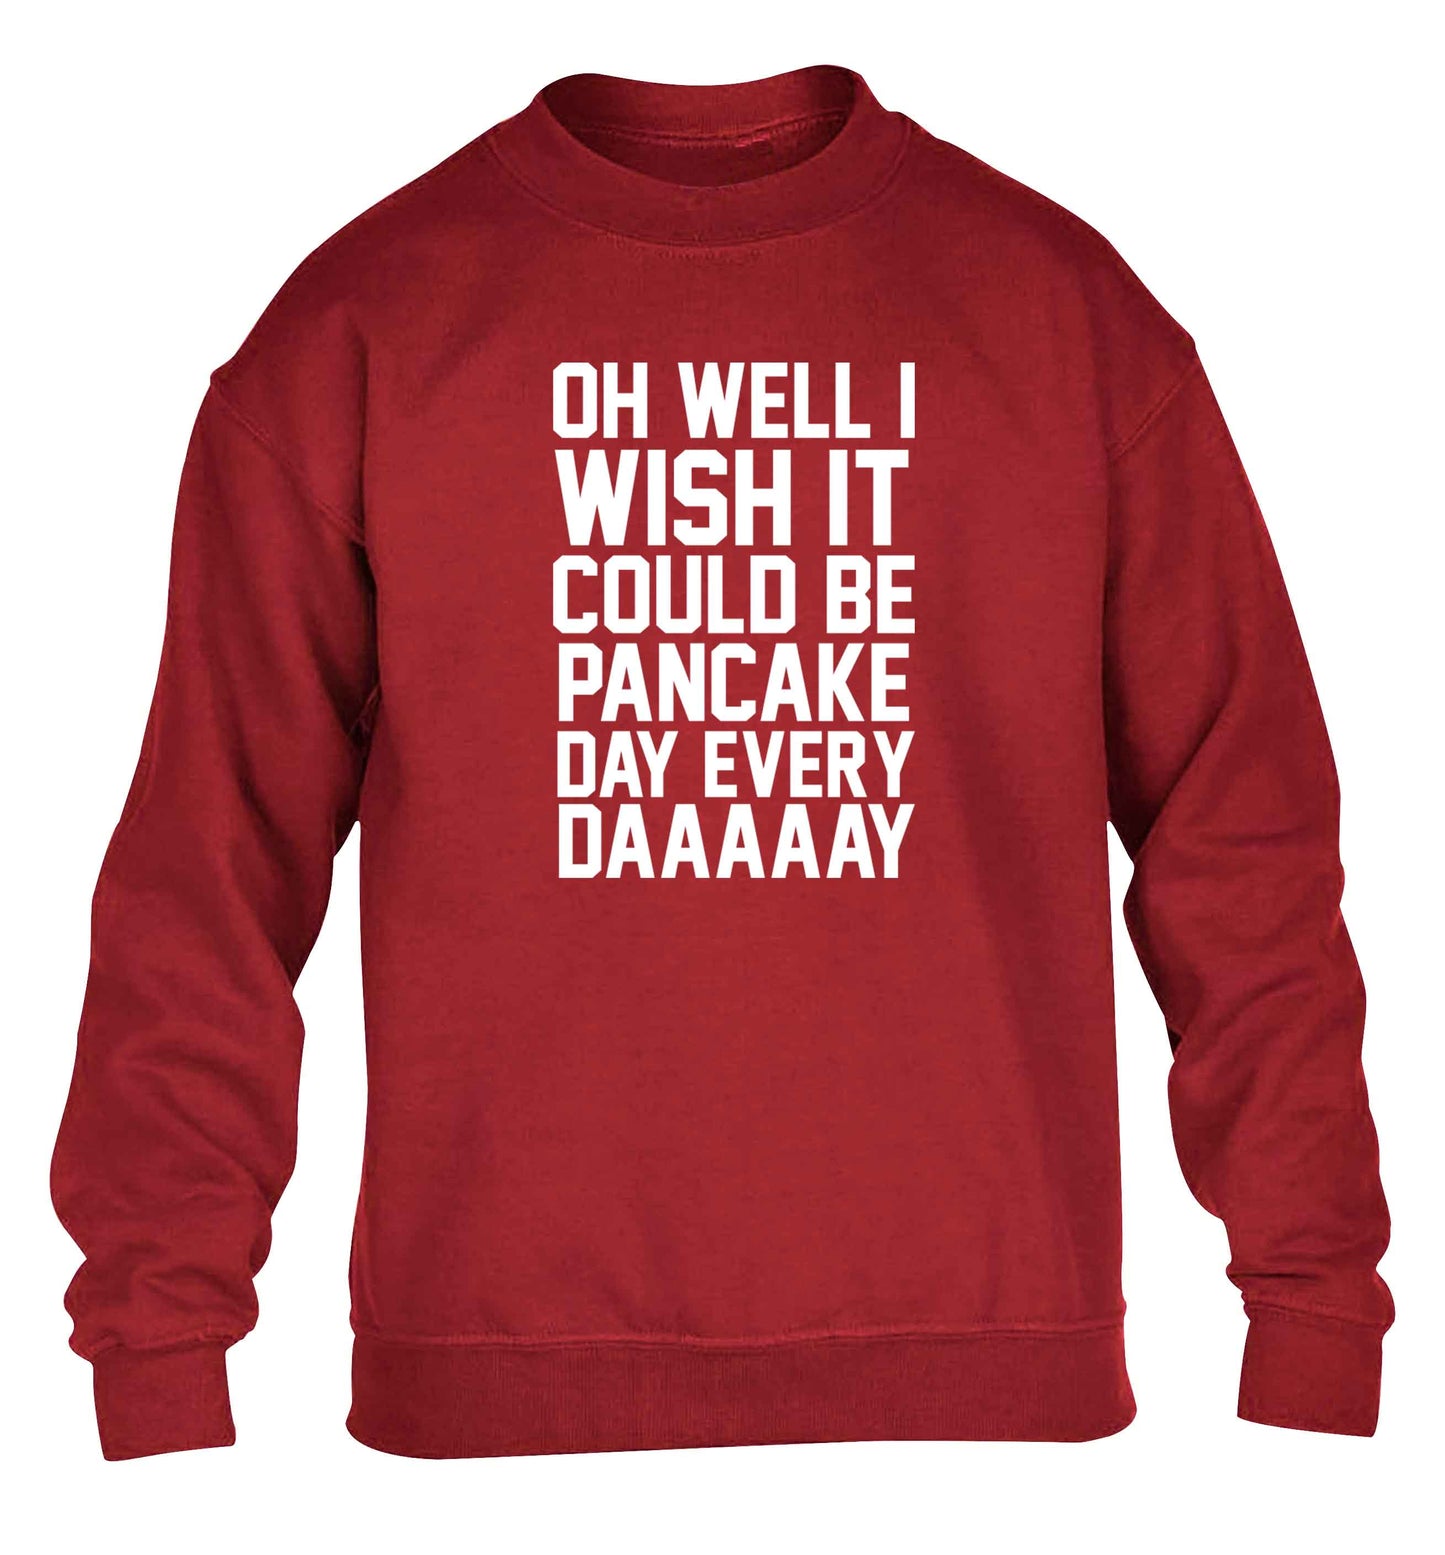 Oh well I wish it could be pancake day every day children's grey sweater 12-13 Years